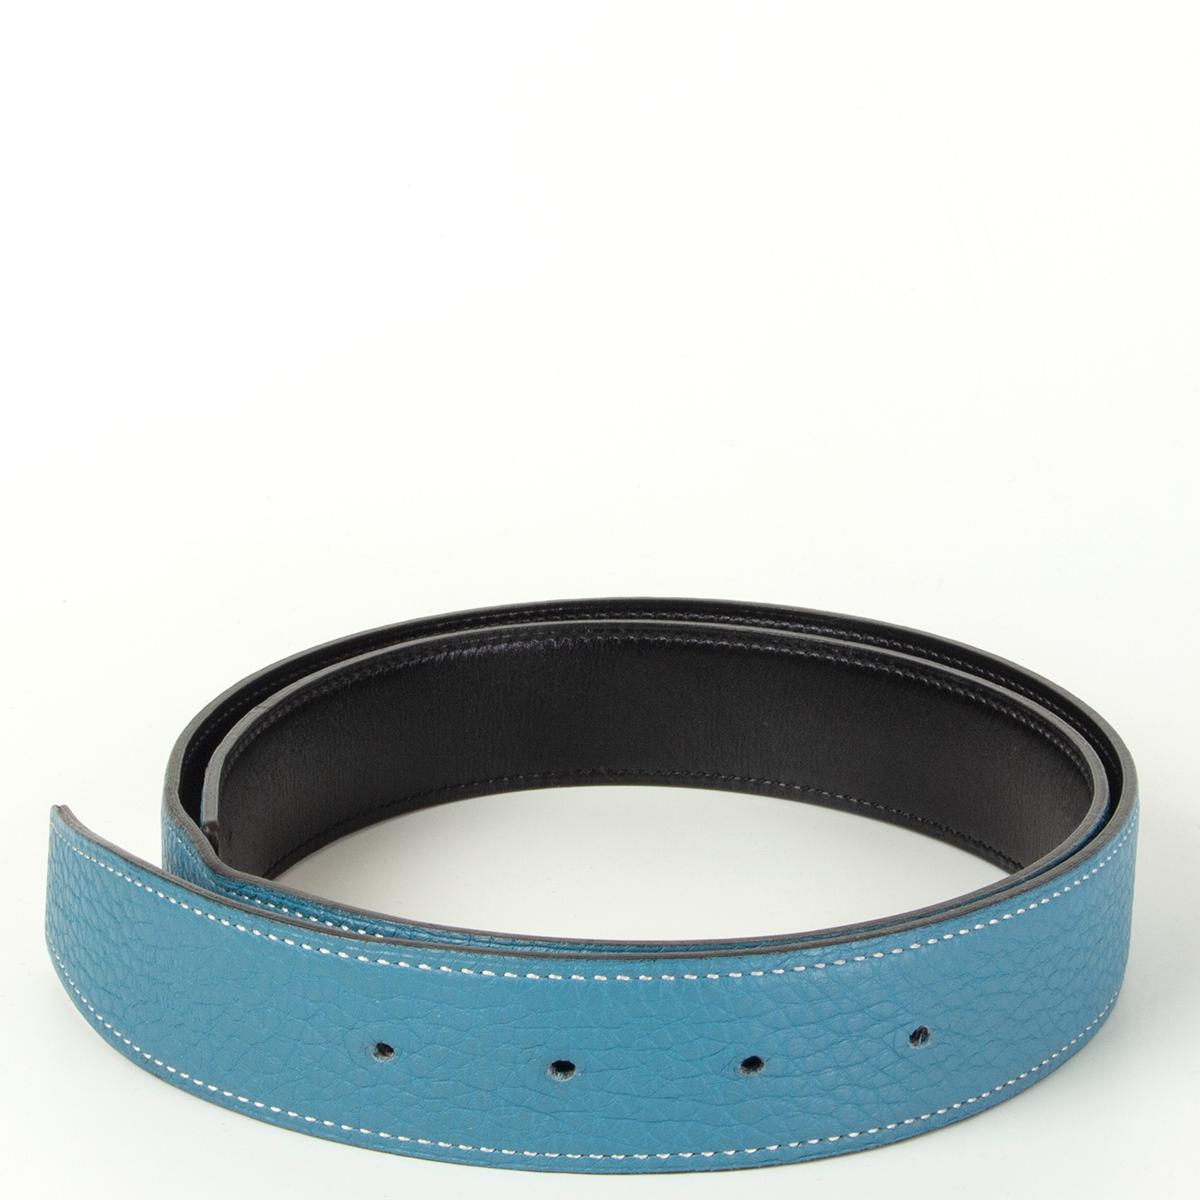 Hermès 32mm reversible belt strap in Bleu Jean Togo and Noir Veau Box leather. Has been worn and is in excellent condition. 

Tag Size 85
Width 3cm (1.2in)
Fits 79.5cm (31in) to 87cm (33.9in)
Length 99cm (38.6in)